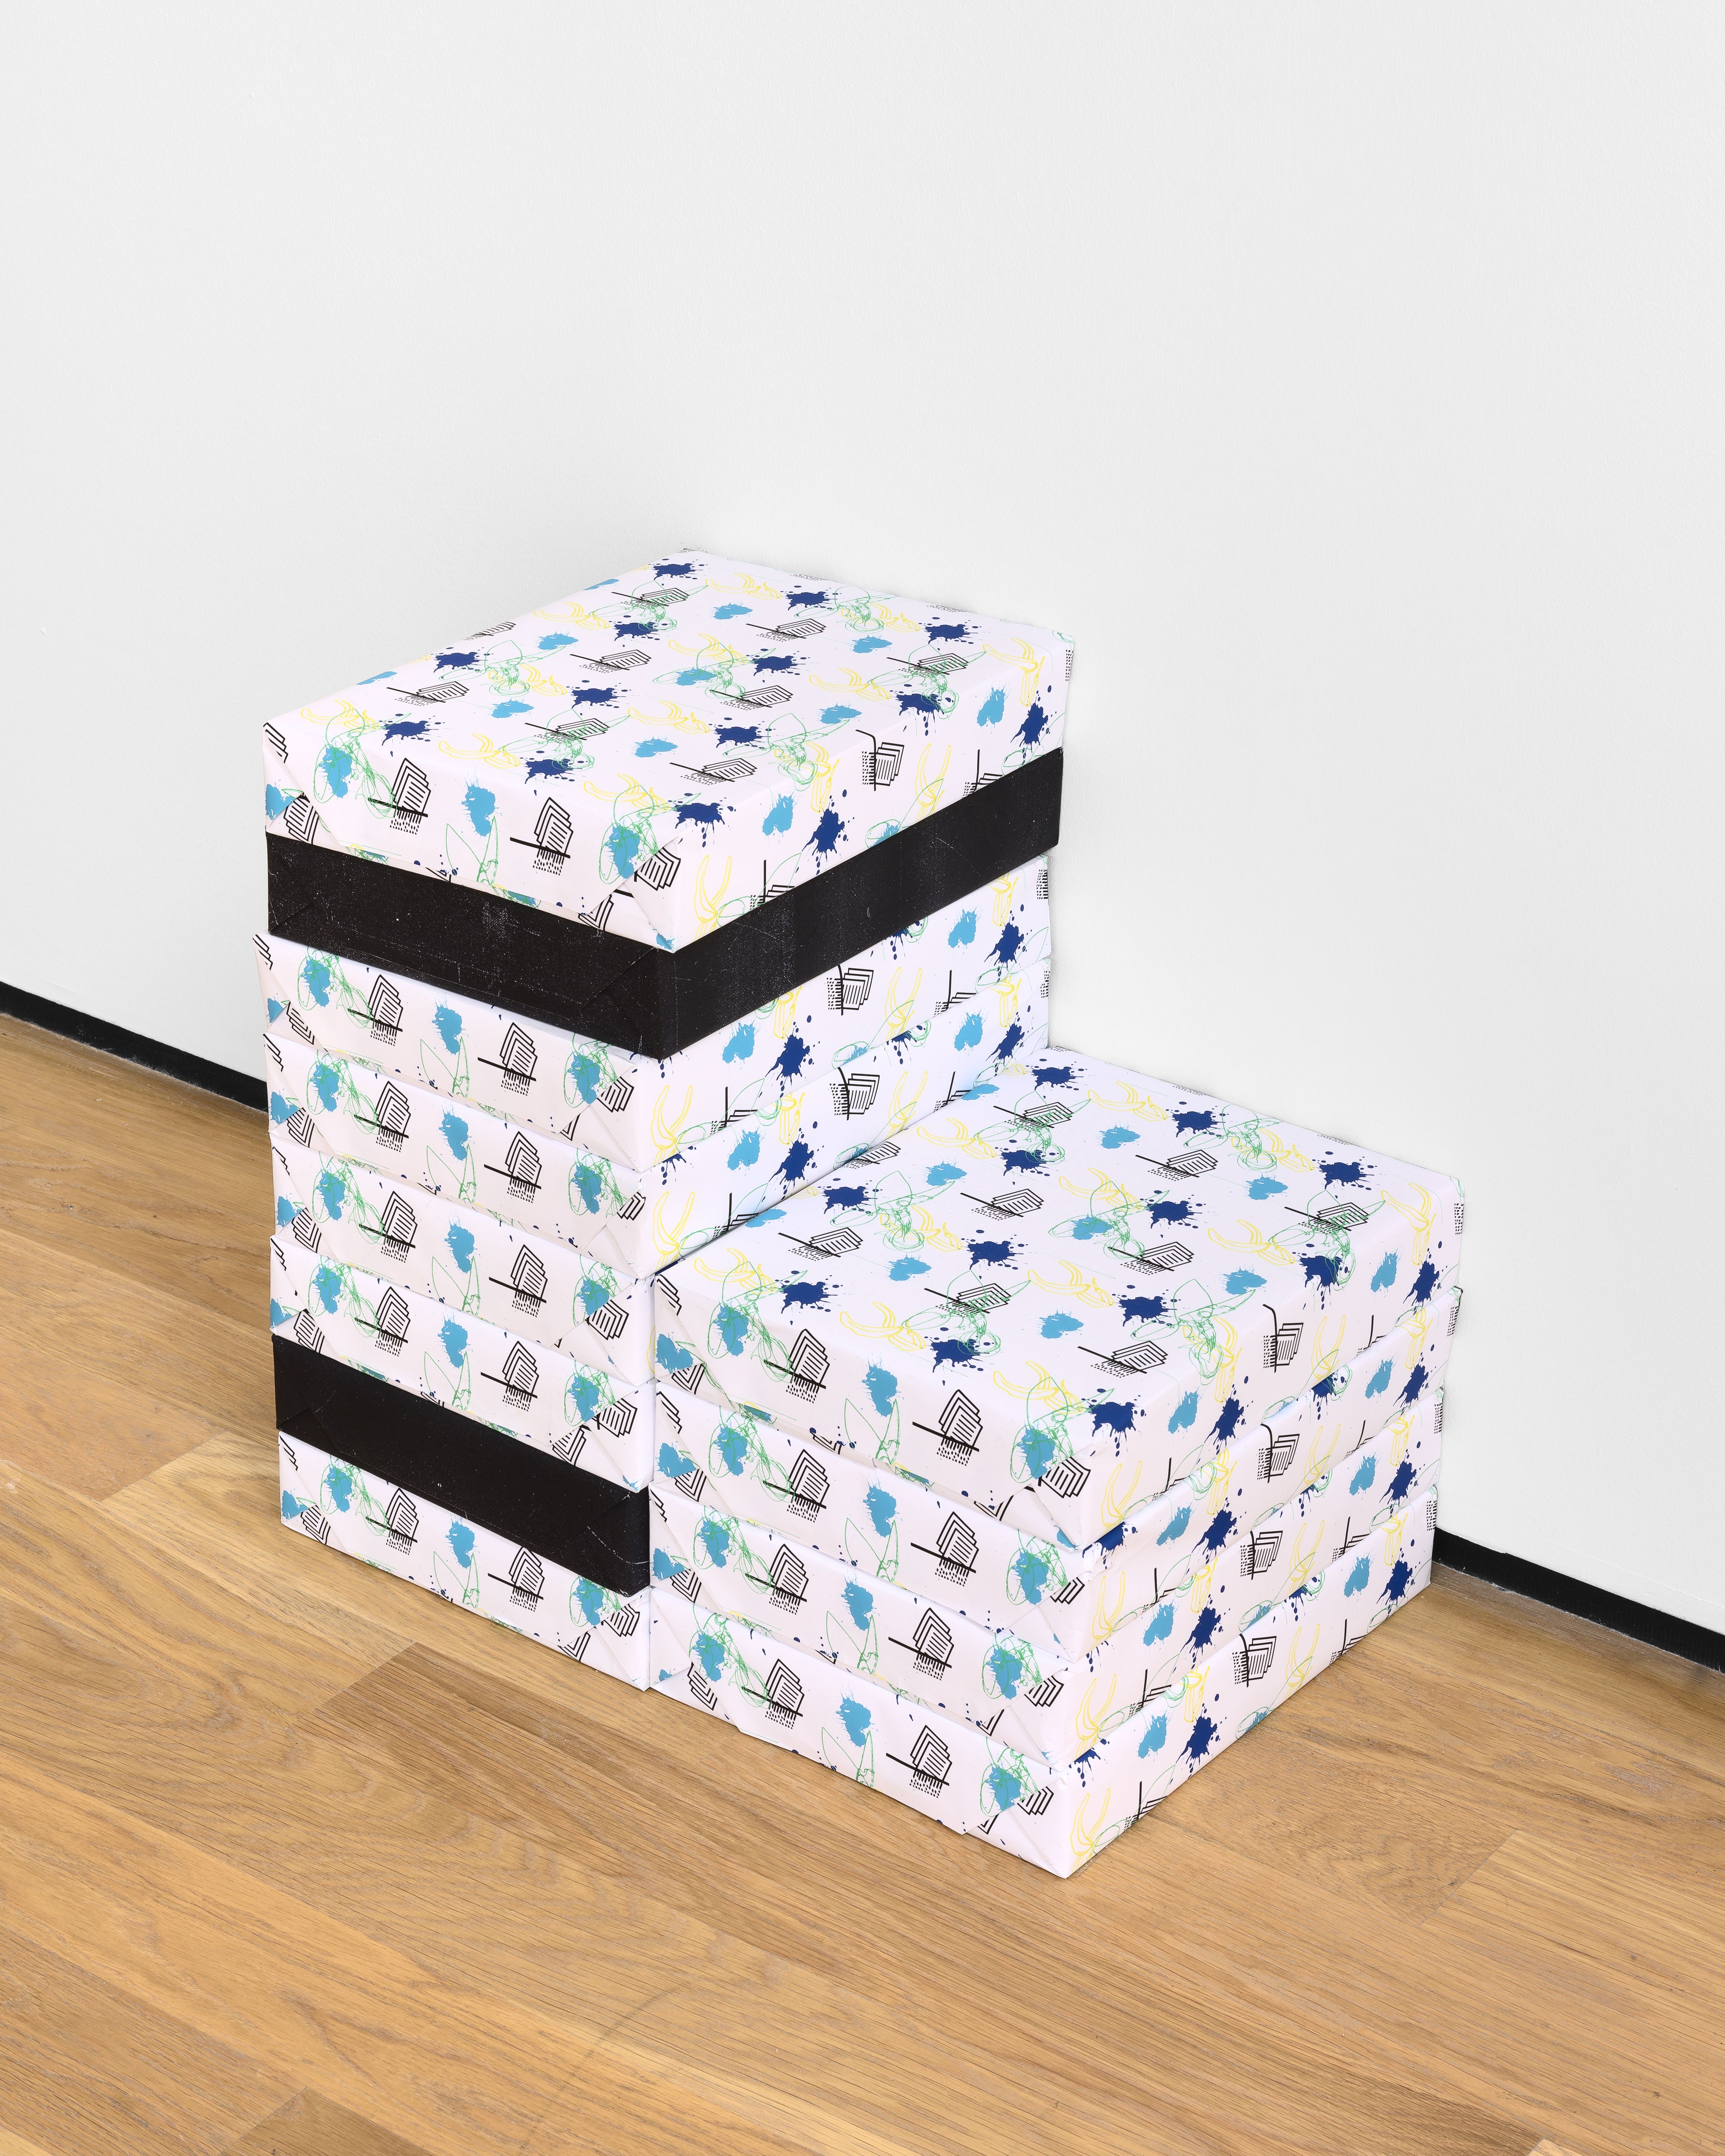 Michael Bell-Smith, Paper Pile C, 2017, archival pigment prints on matte paper, printer paper, transfer tape, dimensions variable